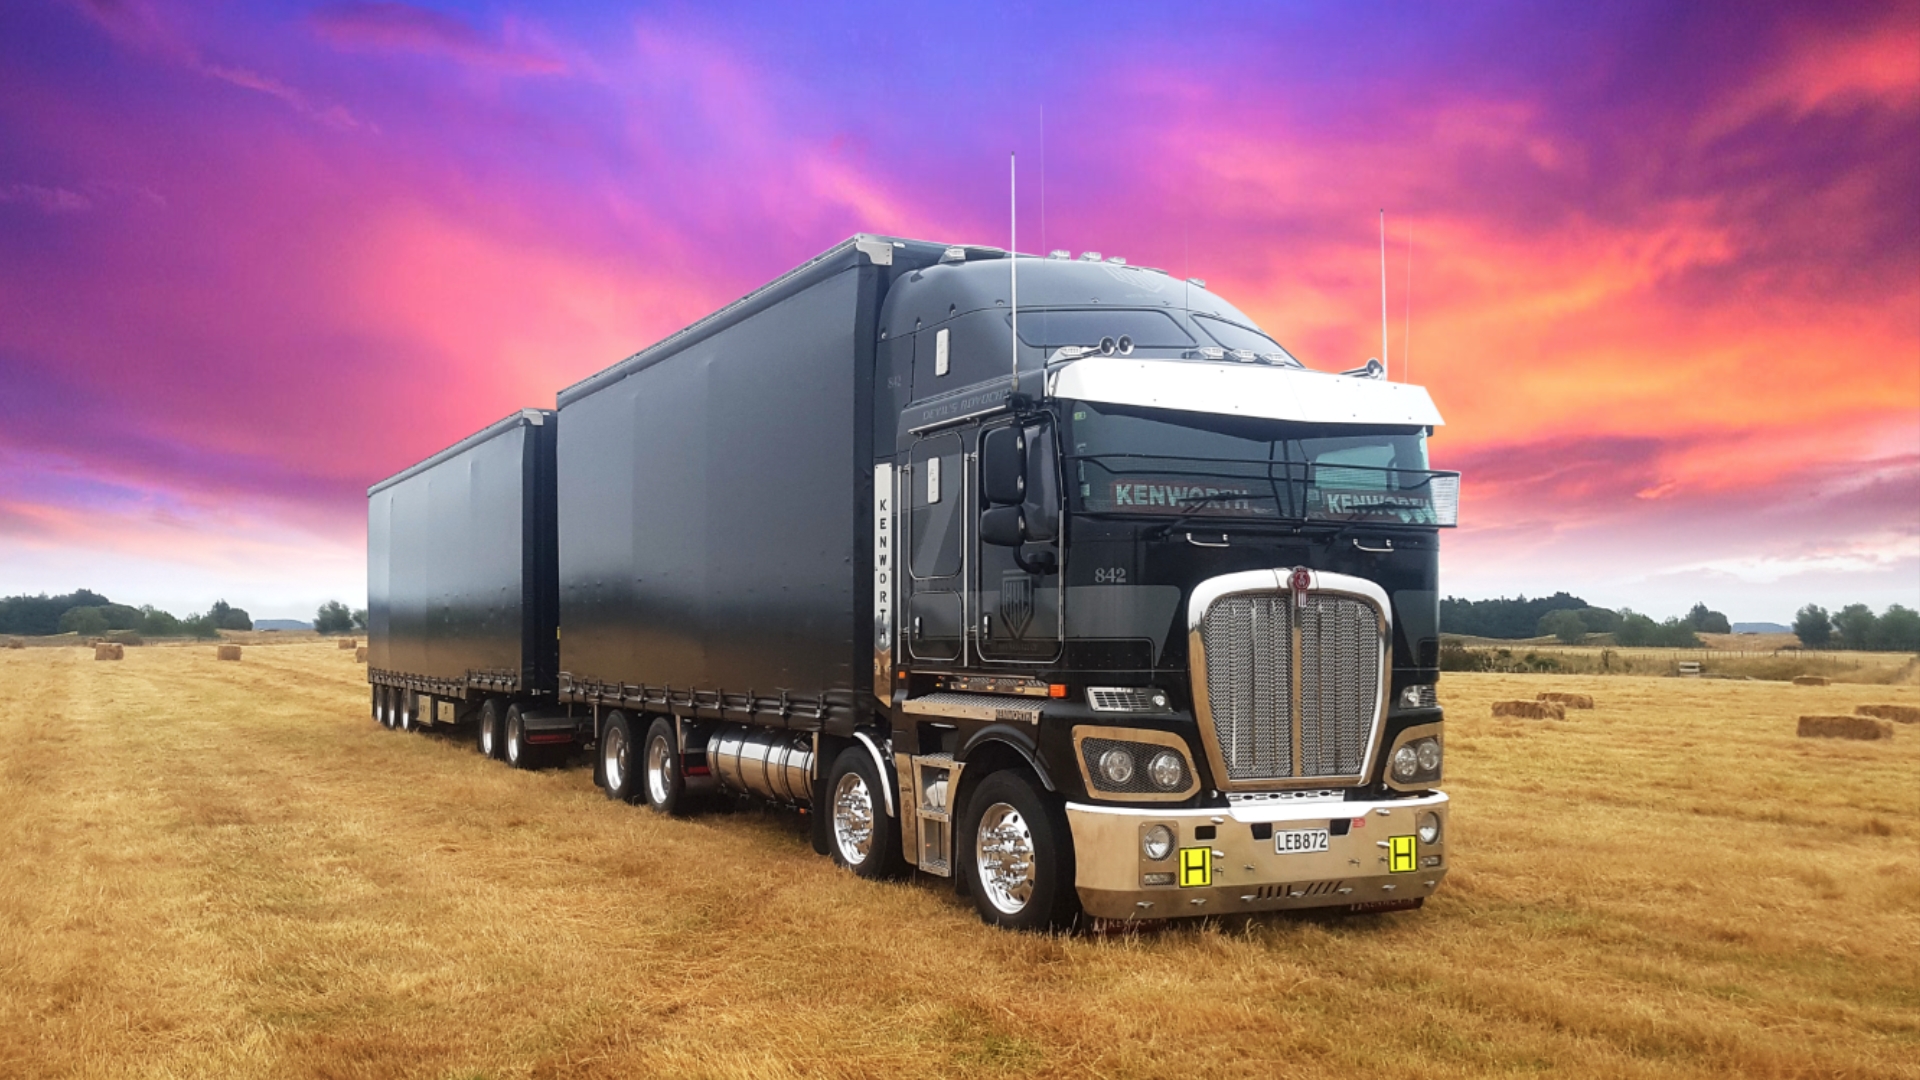 MyTrucking transport management software has helped Hog Haulage grow their business